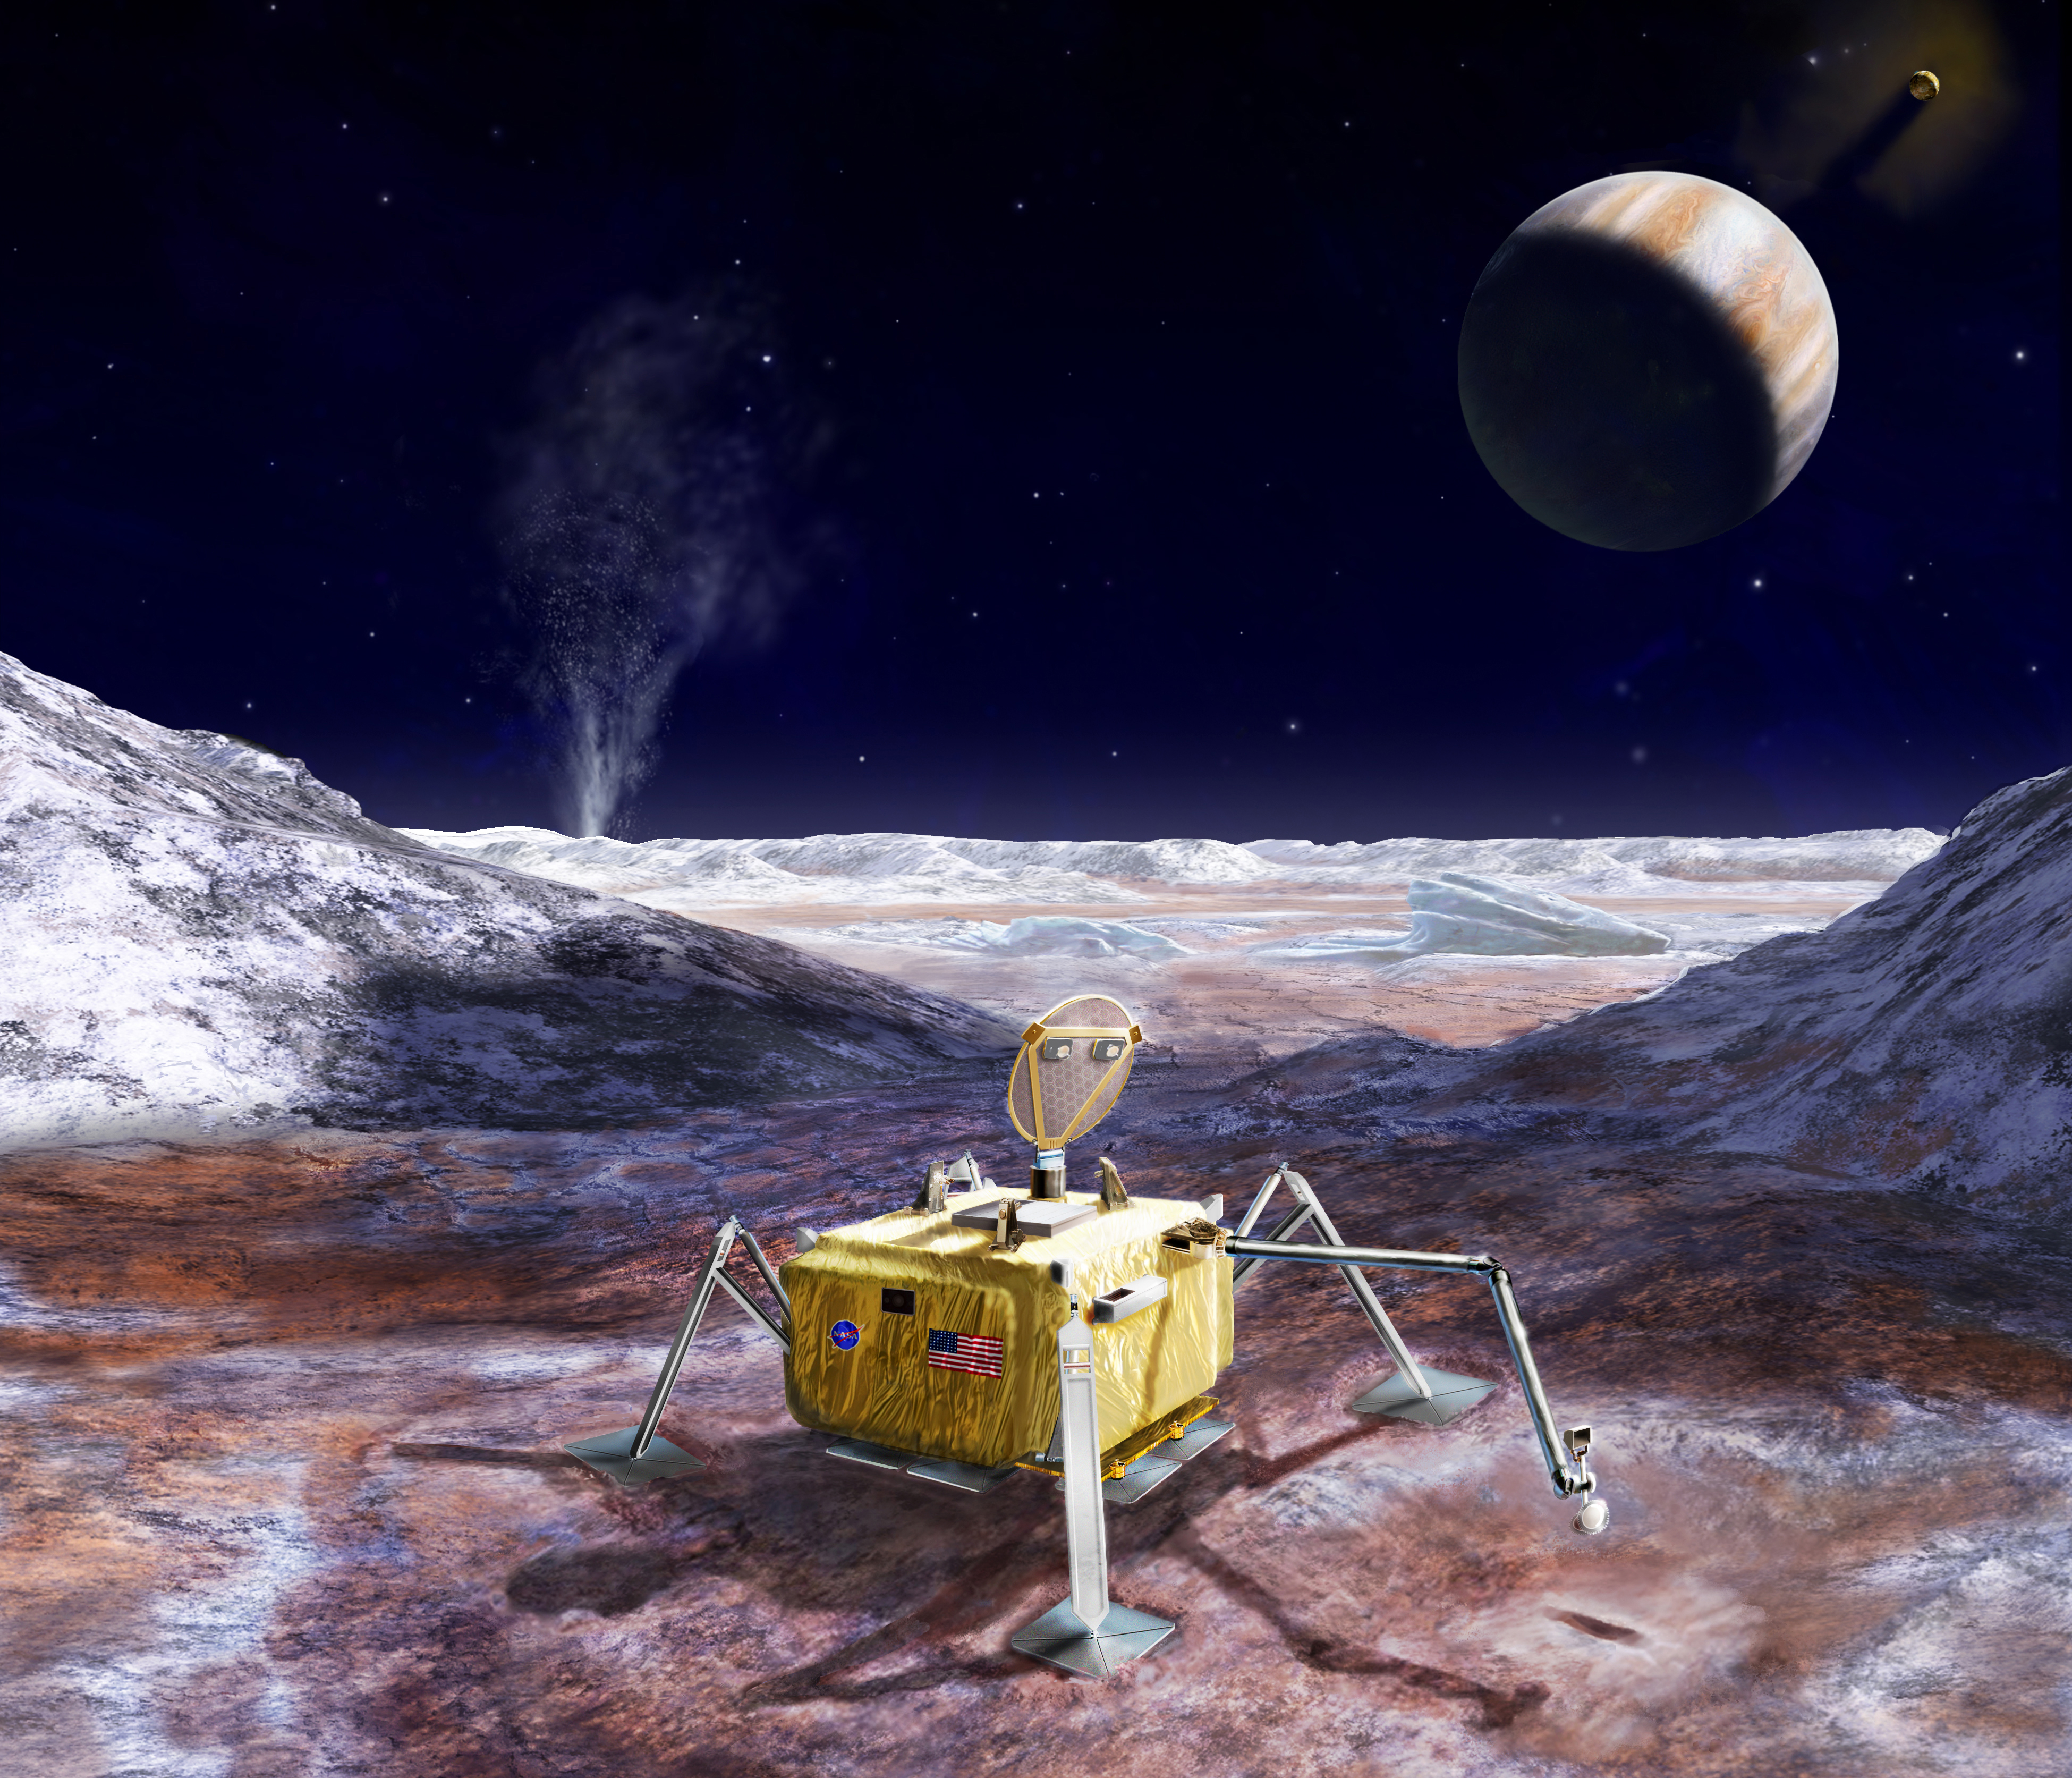  This artist rendering illustrates a conceptual design for a potential future mission that would land a robotic probe on the surface of Jupiter's icy moon Europa. A Europa lander would need to withstand radiation, frigid temperatures, ice and potentially mist from possible plumes jetting from the moon's surface. Image credit: NASA/JPL-Caltech